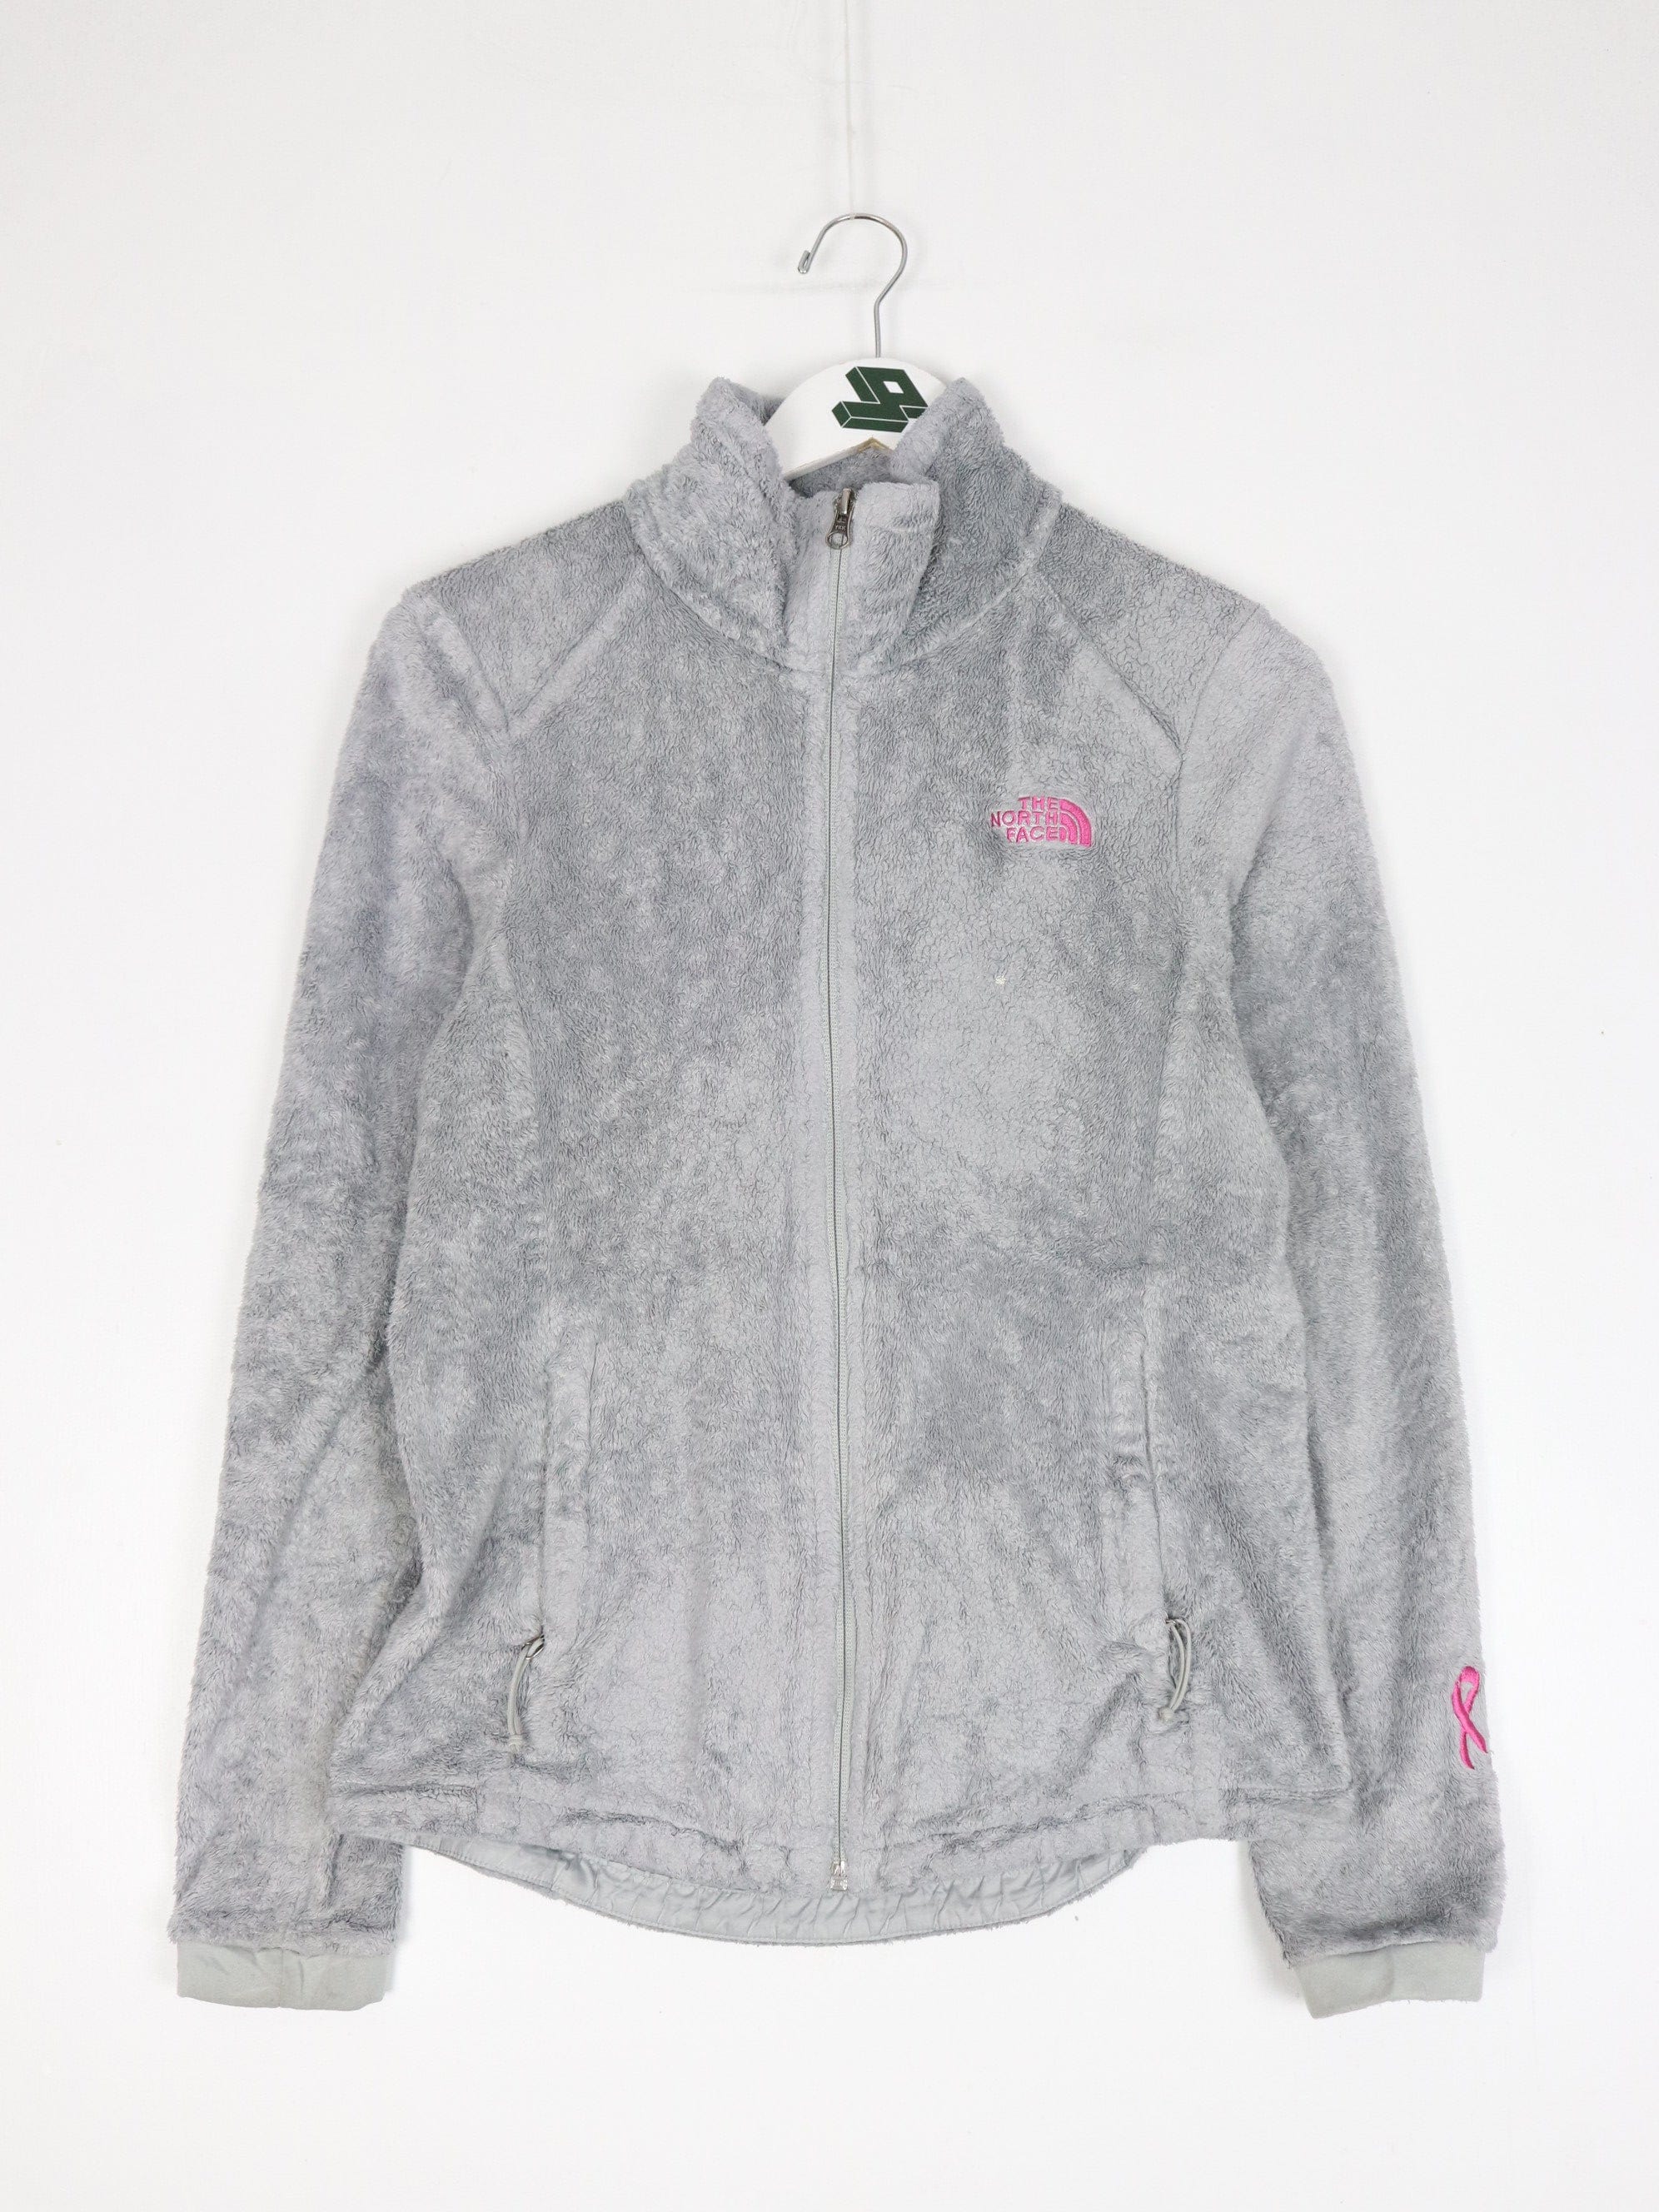 The North Face Womens Fleece Full Zip Jacket Grey Hoodie Size Small